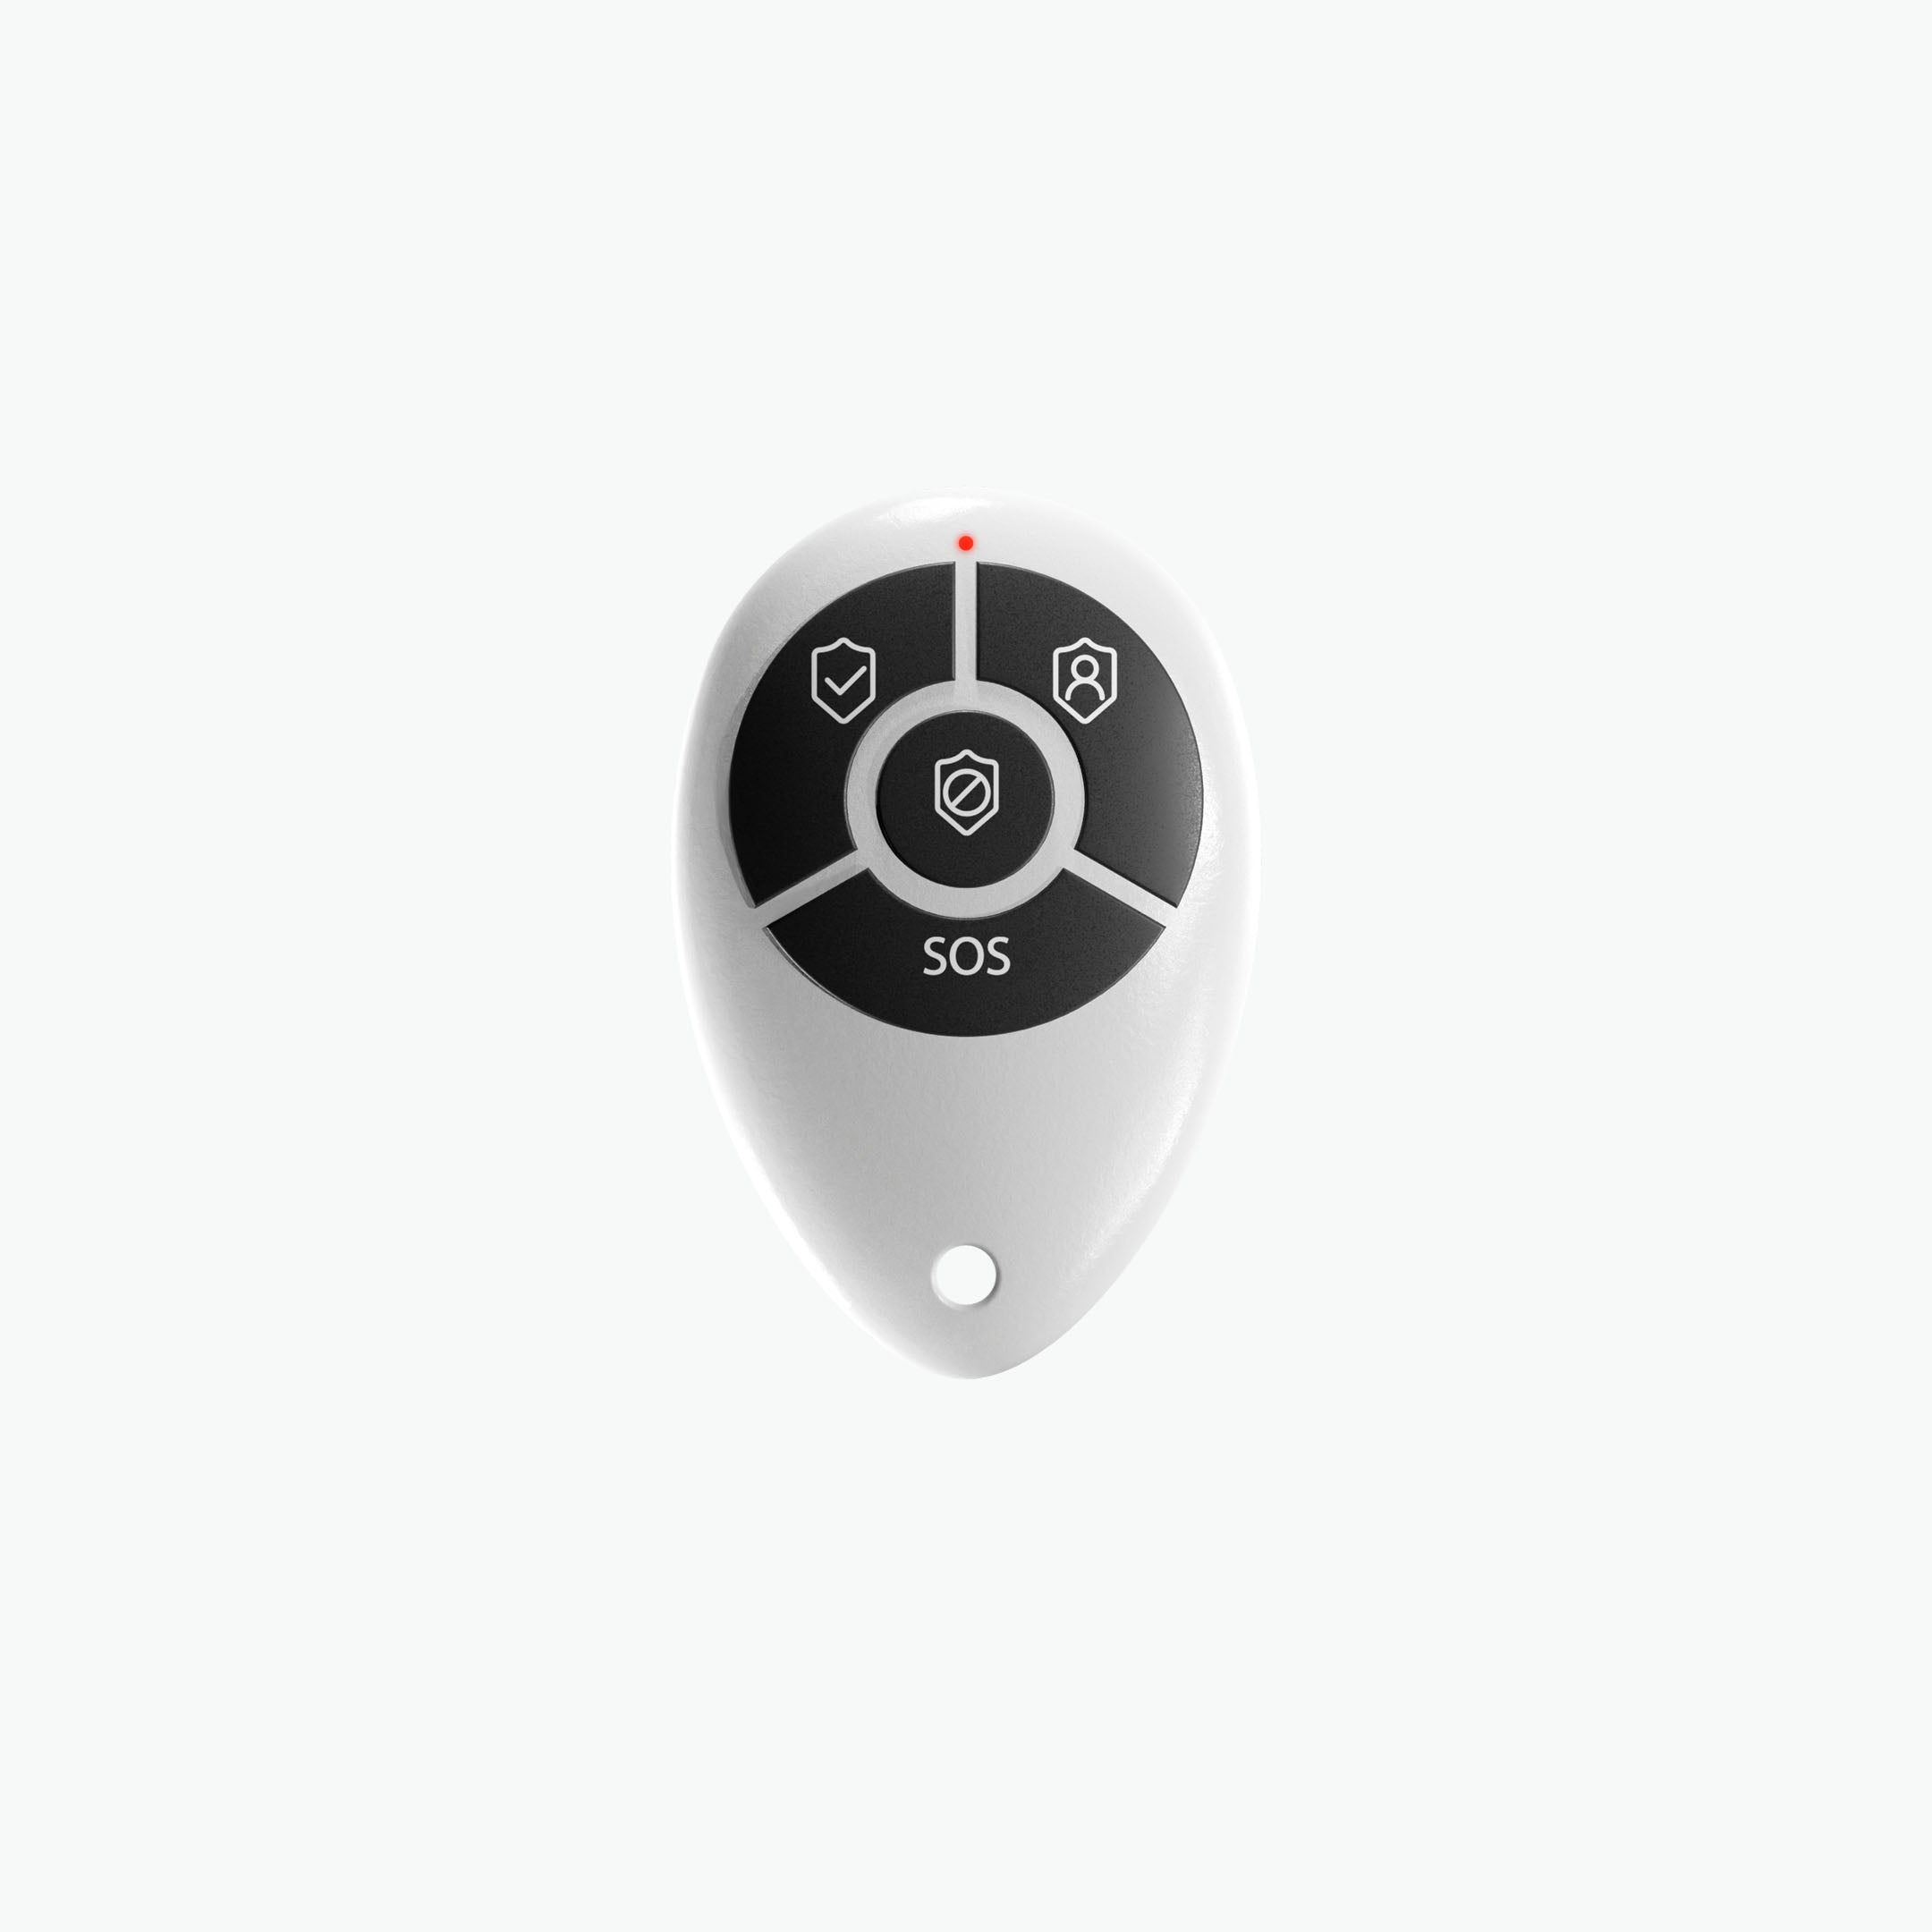 Front view of Staniot R01 Wireless Security Mini Remote control for SecPanel Management on a white background